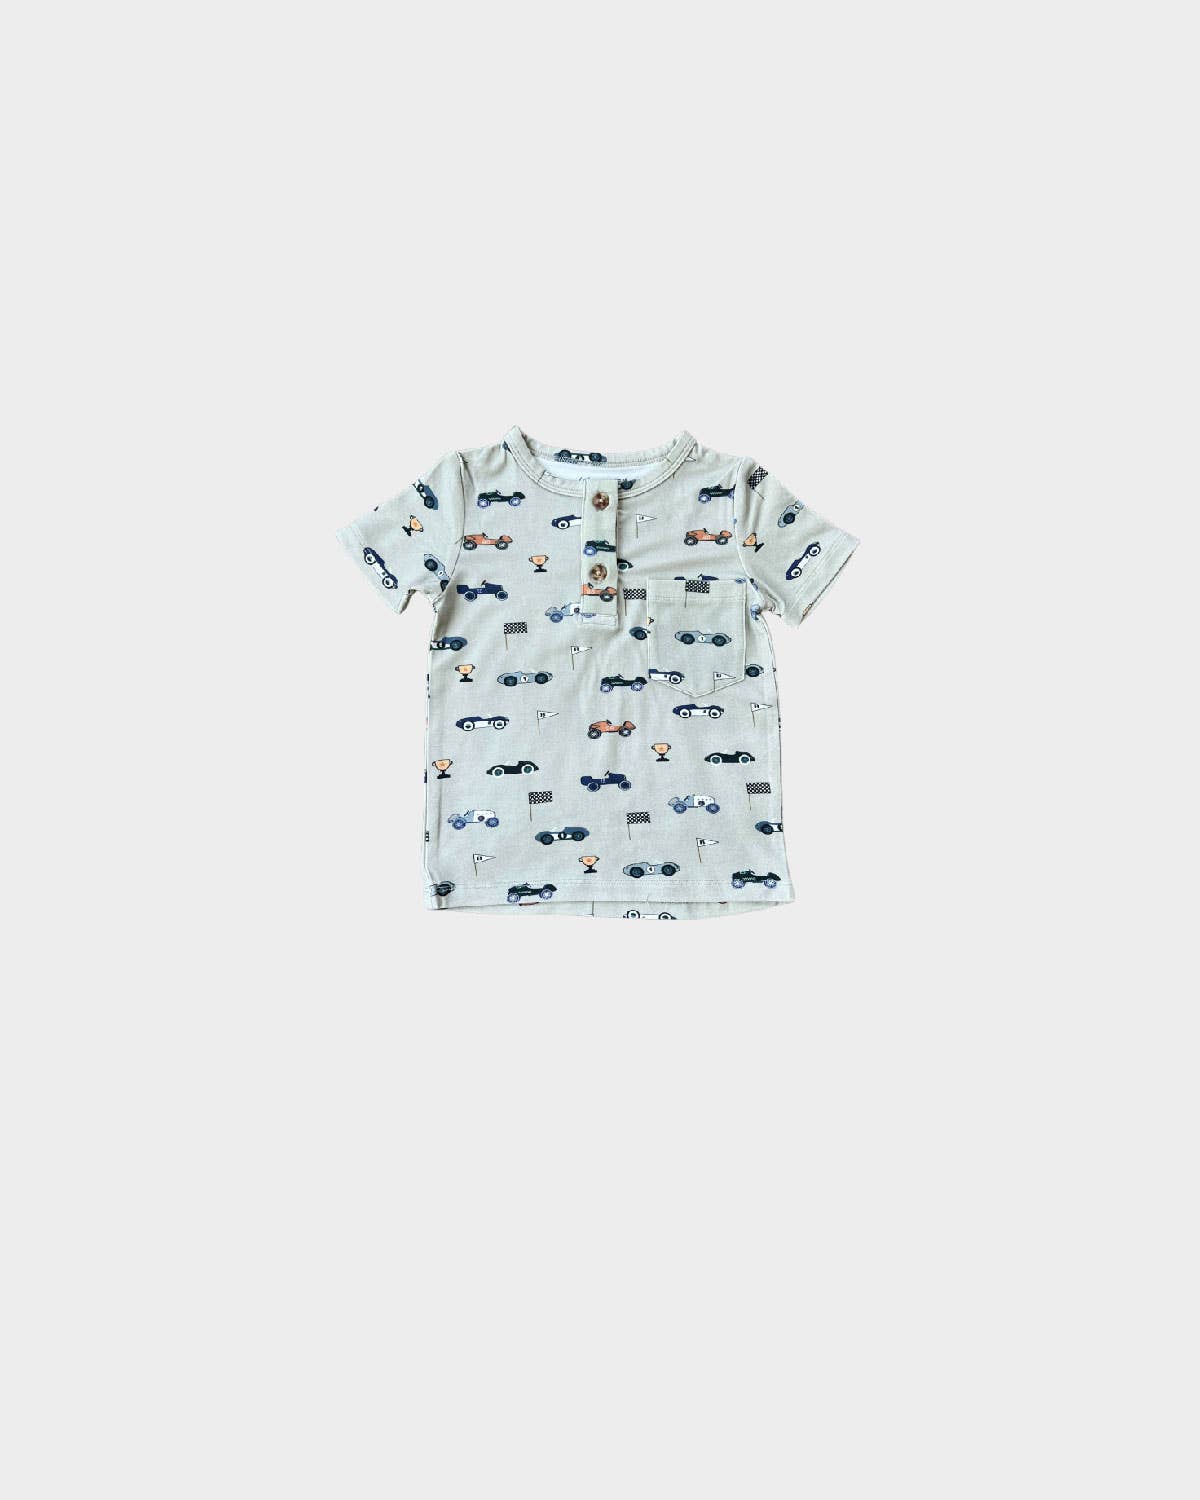 babysprouts clothing company - S24 D1: Boy's Henley Shirt in Retro Race Cars